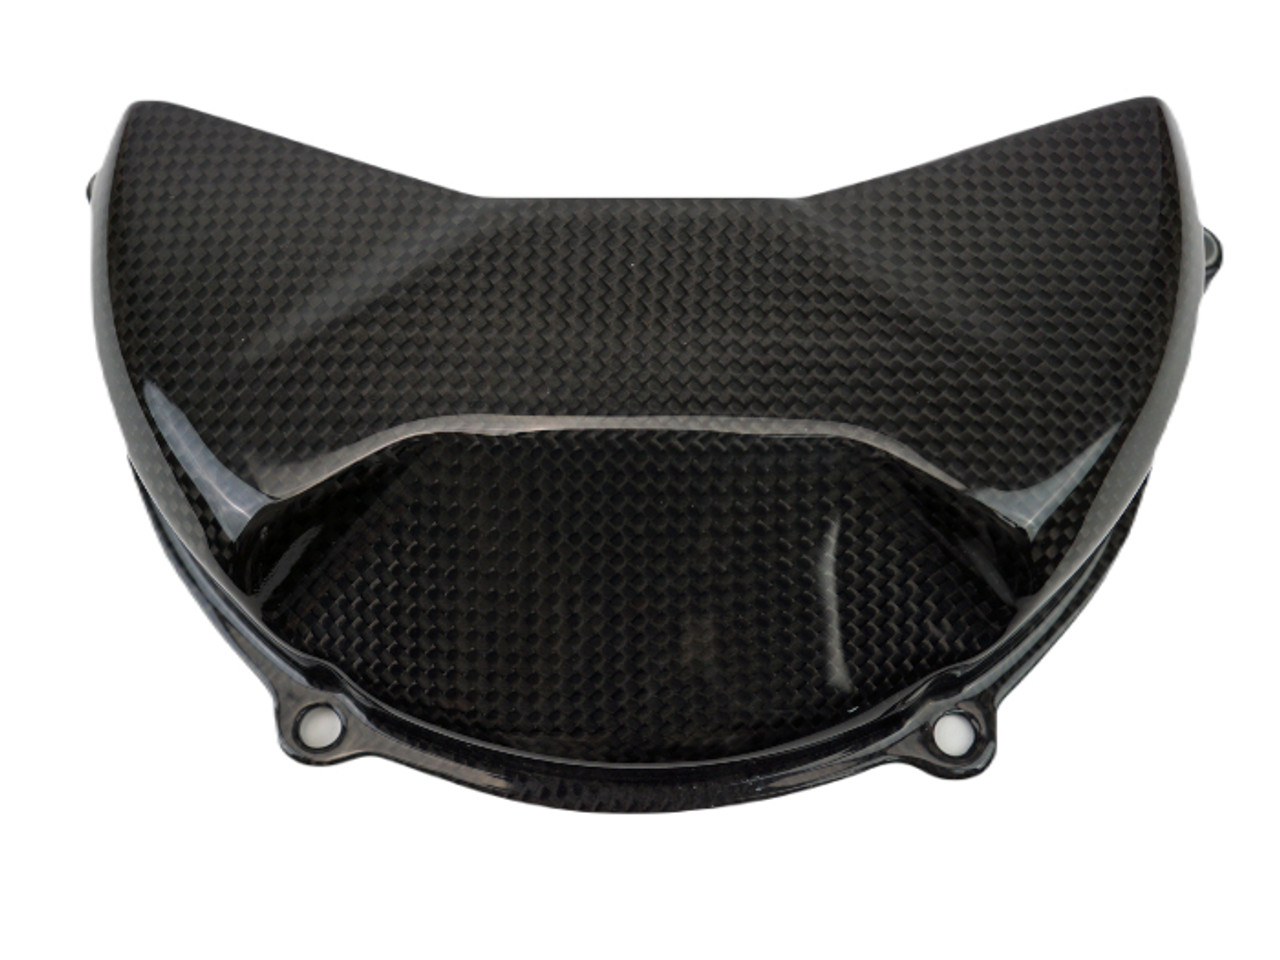 Clutch Cover Guard (Smaller) in Glossy Plain Weave Carbon Fiber for Ducati Streetfighter V4, Panigale V4

